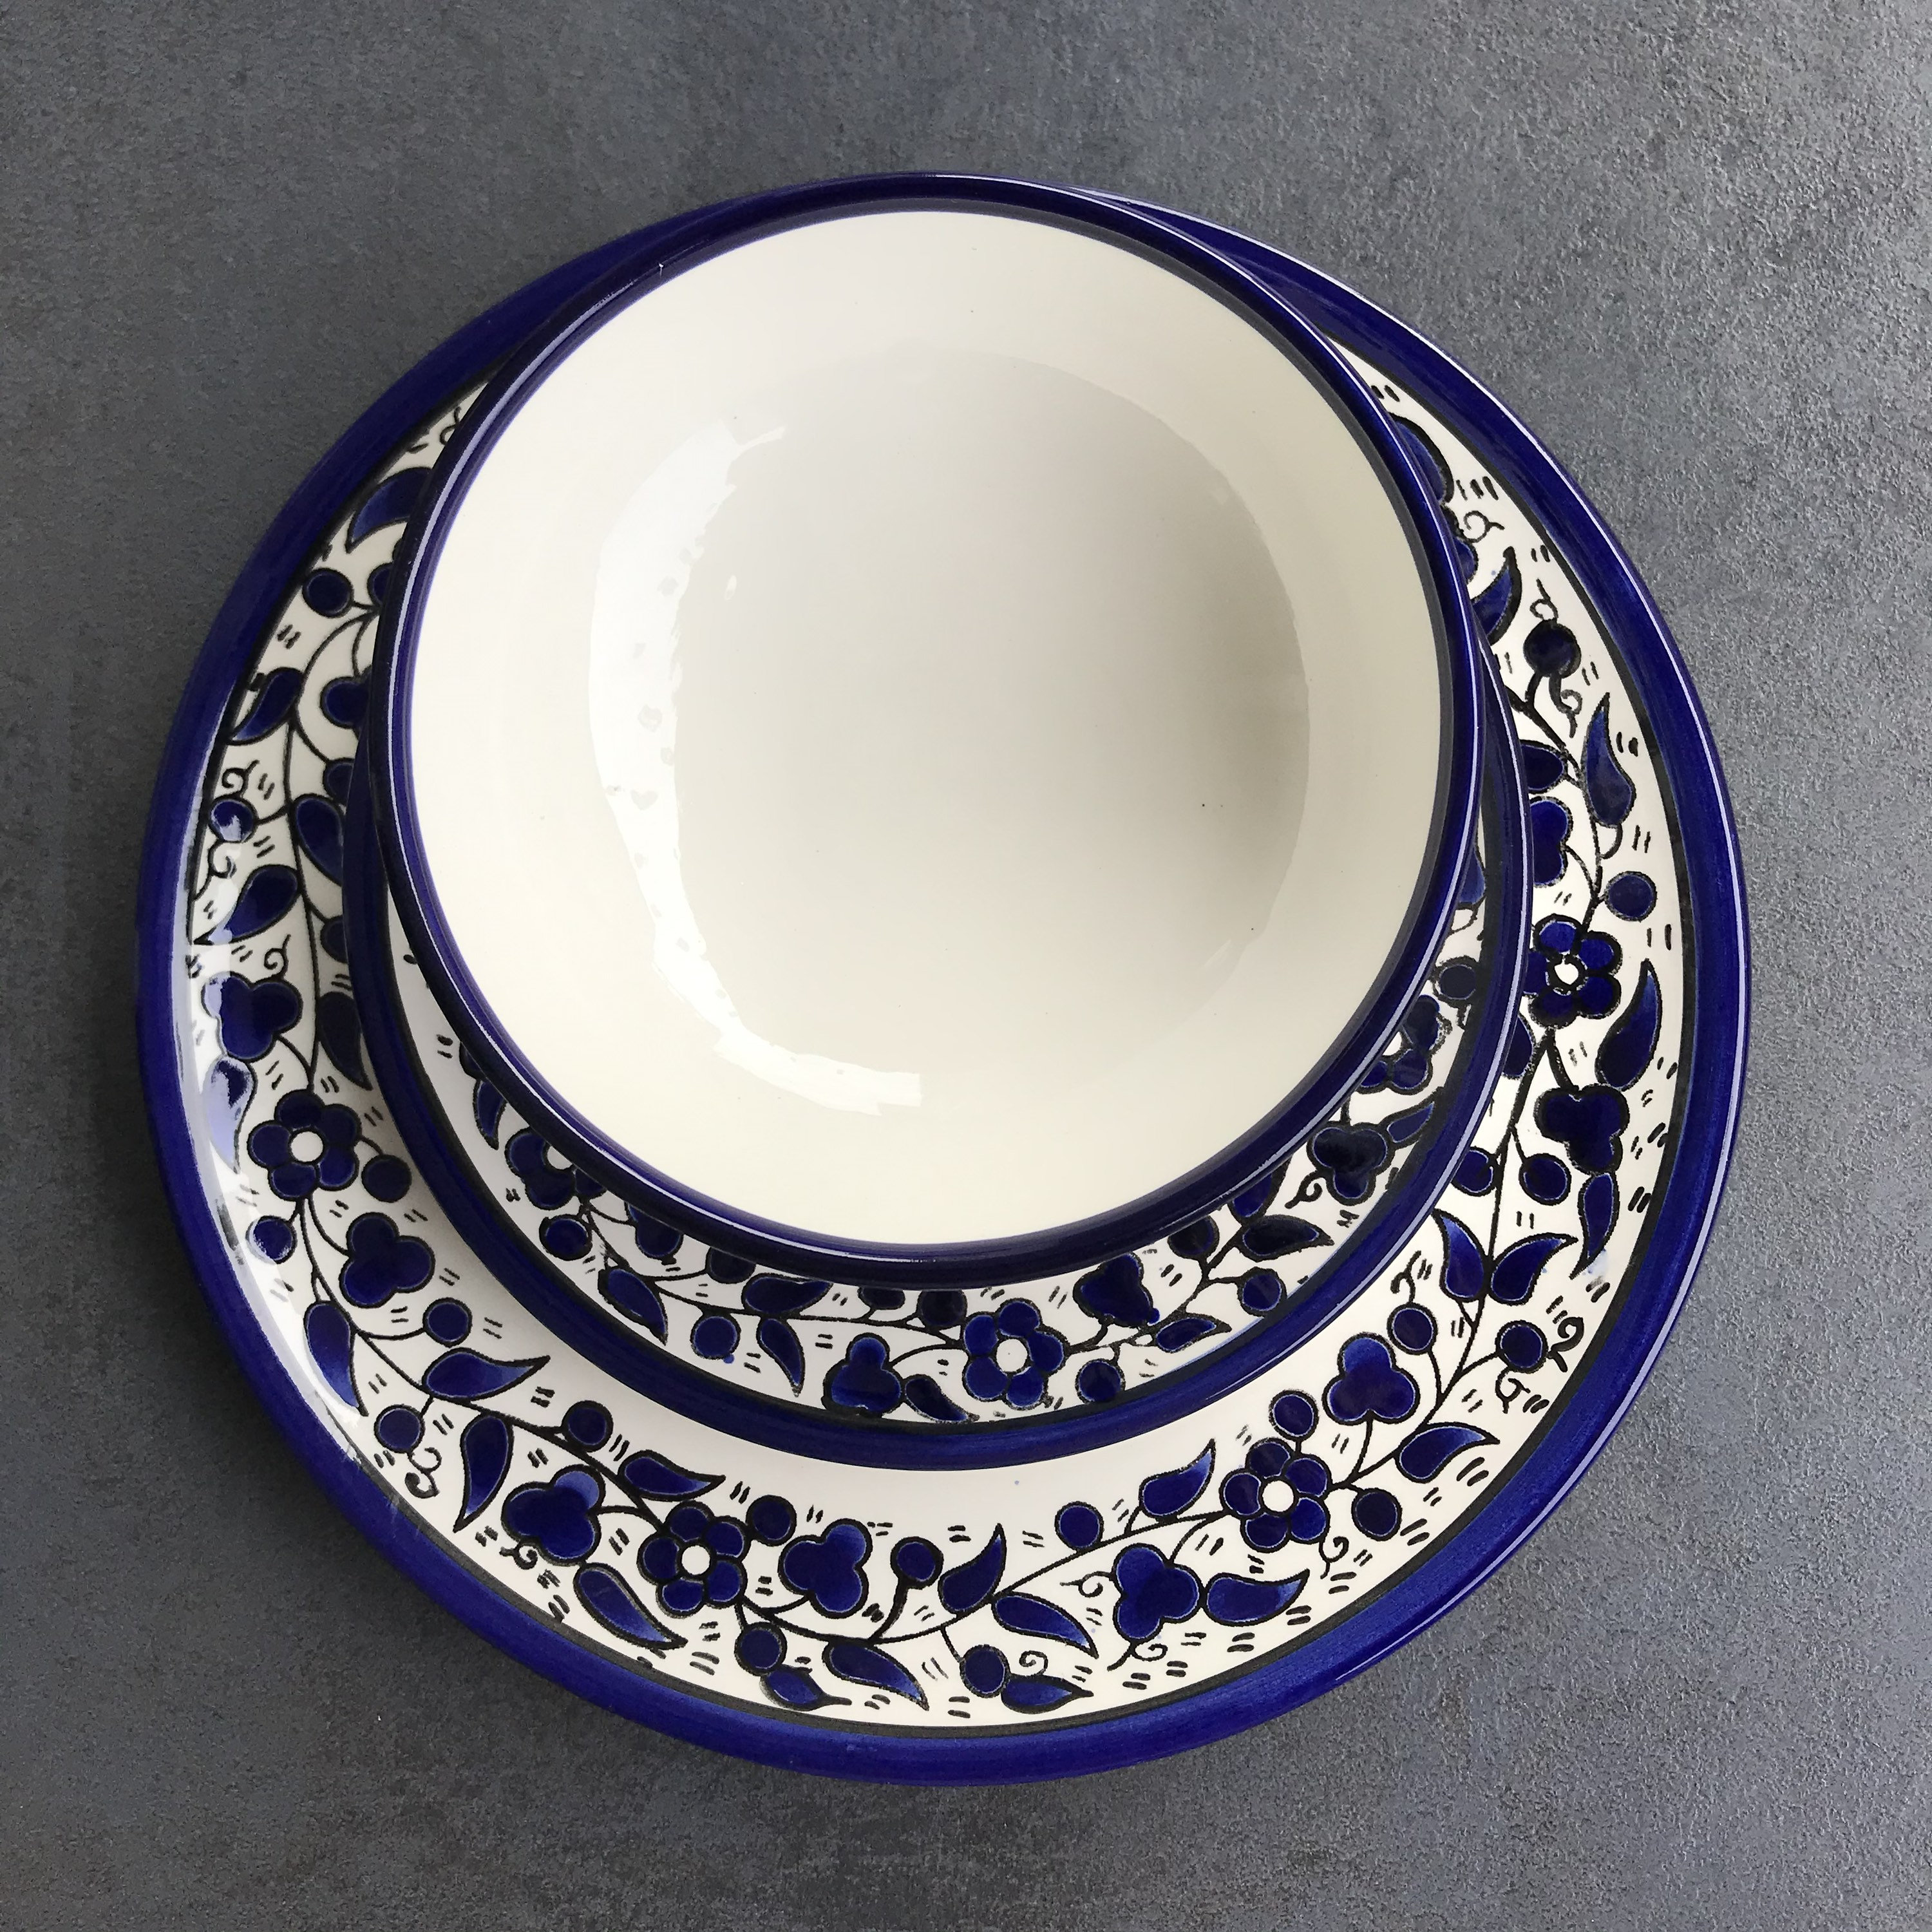 Buy Crockery Set With Hand-painted Blue and White Flowers, Table Service:  Large and Small Plate Soup/cereal Bowl for 2, 4 or 6 People Online in India  